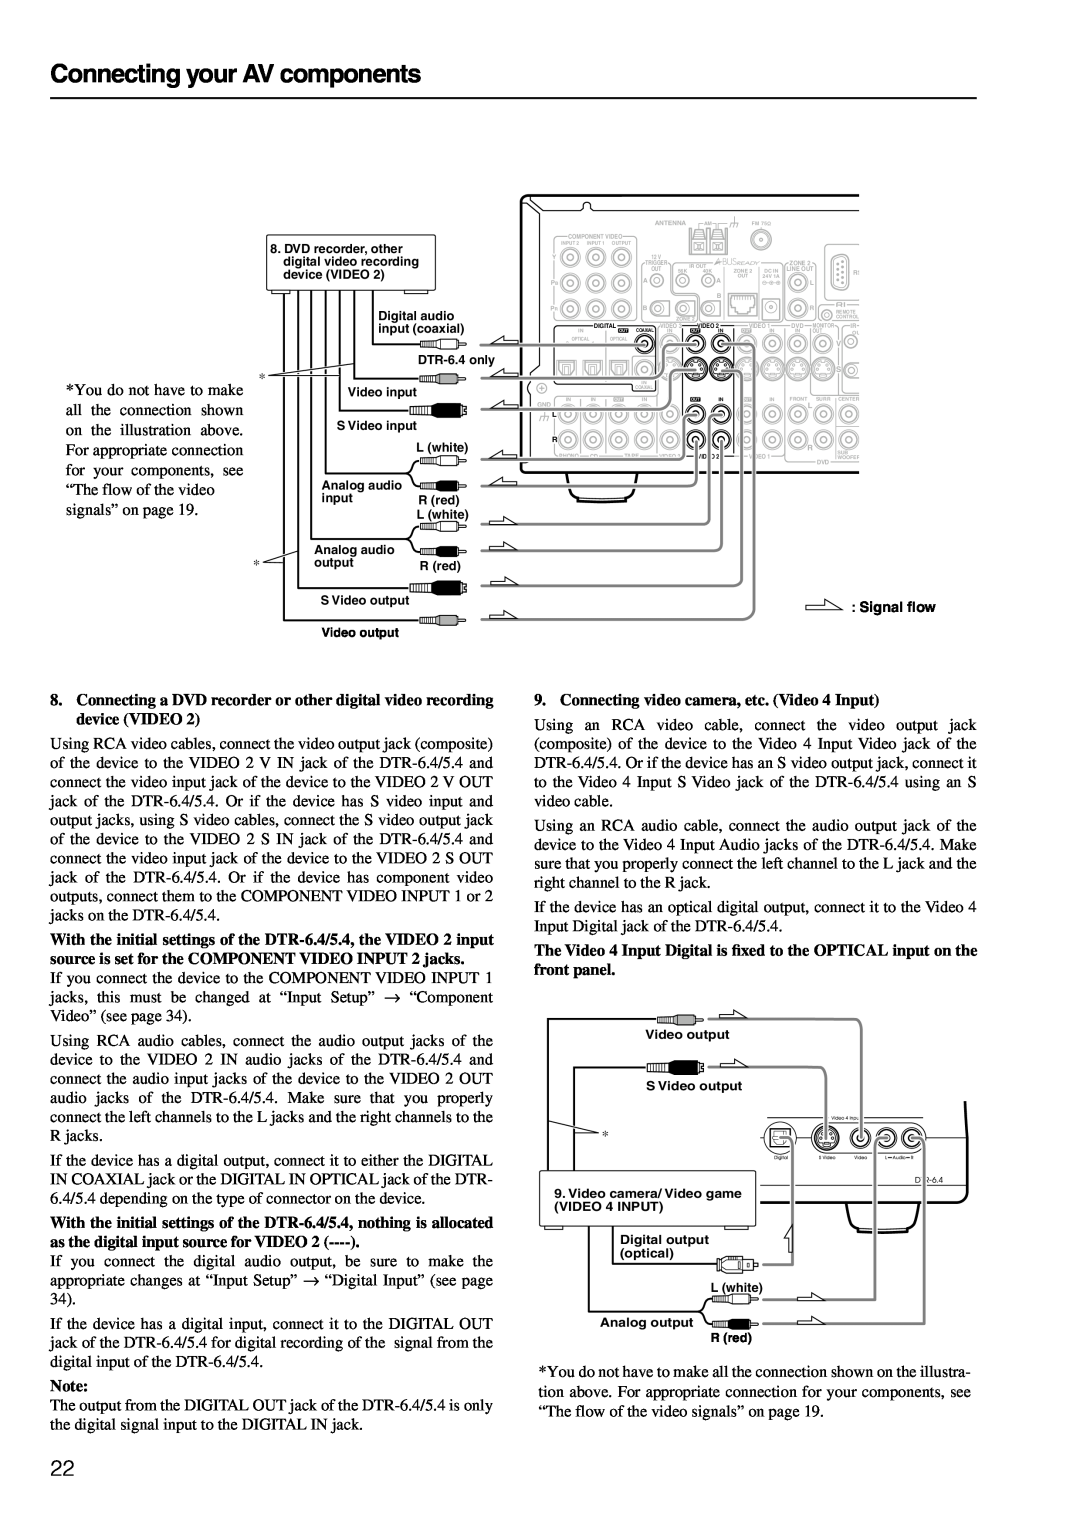 Integra DTR-6.4/5.4 instruction manual Connecting your AV components, Connecting video camera, etc. Video 4 Input 